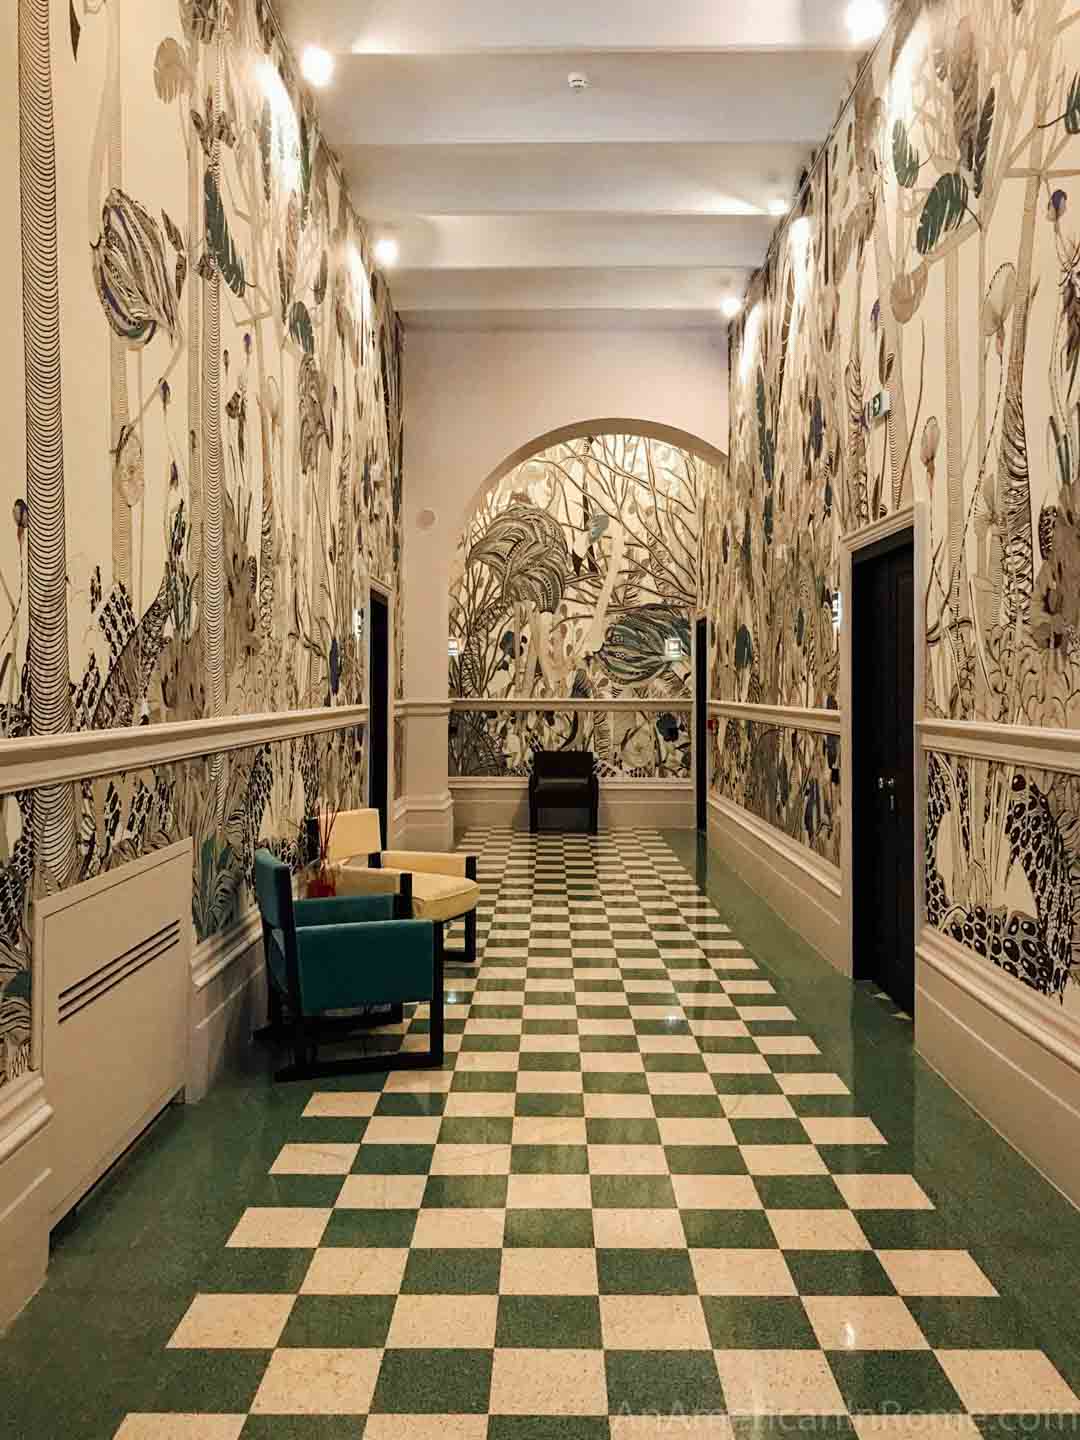 checkered green and white marble floors and patterned wallpaper in hallway at Roma Luxus hotel